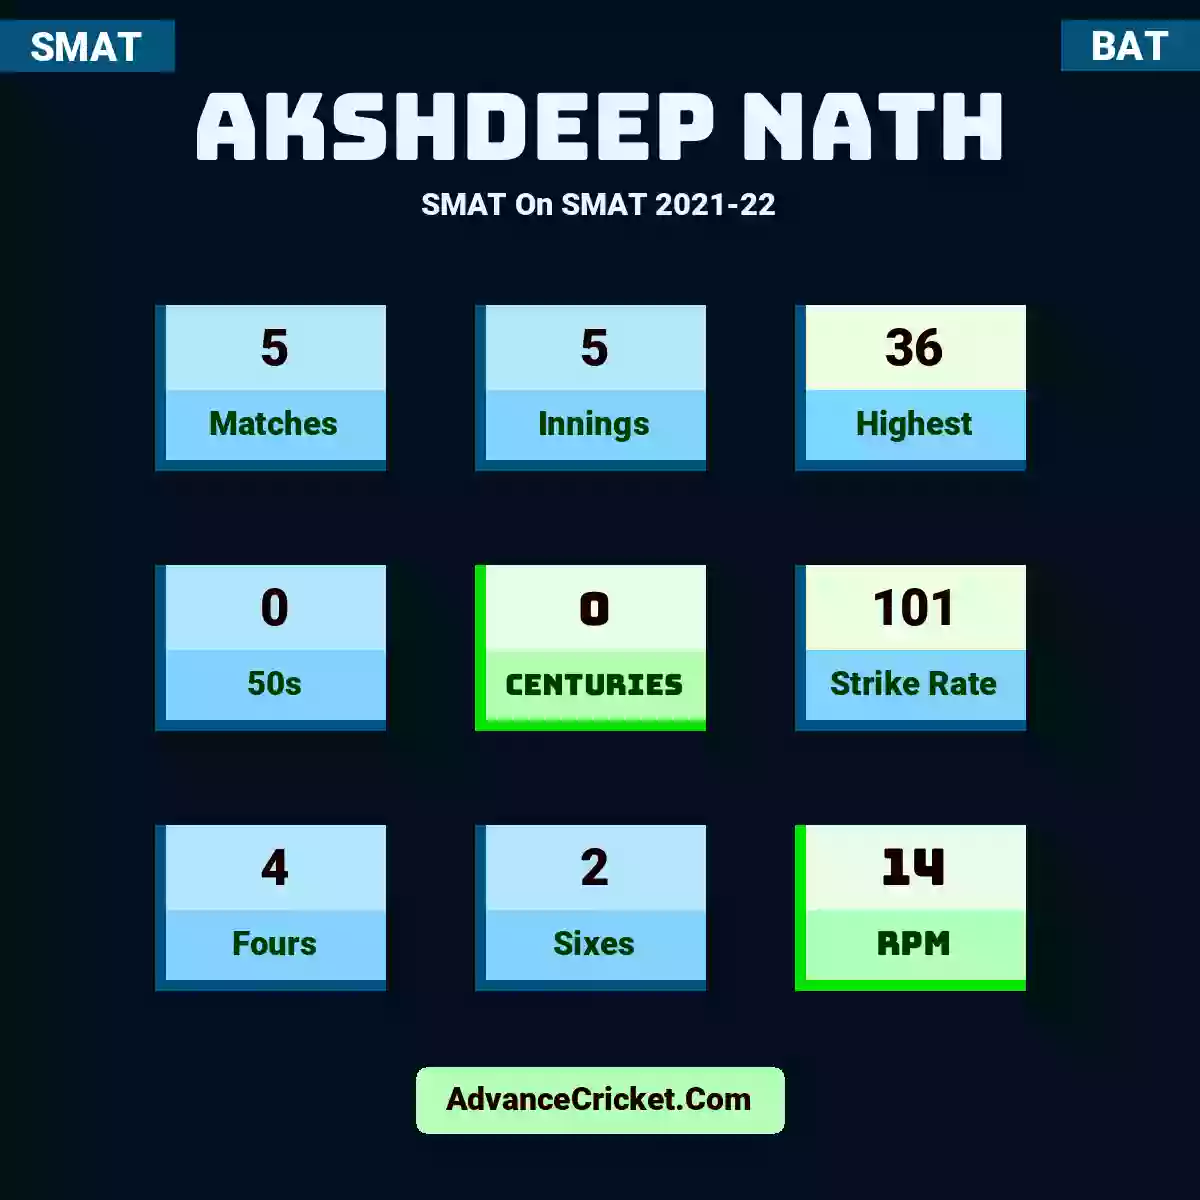 Akshdeep Nath SMAT  On SMAT 2021-22, Akshdeep Nath played 5 matches, scored 36 runs as highest, 0 half-centuries, and 0 centuries, with a strike rate of 101. A.Nath hit 4 fours and 2 sixes, with an RPM of 14.